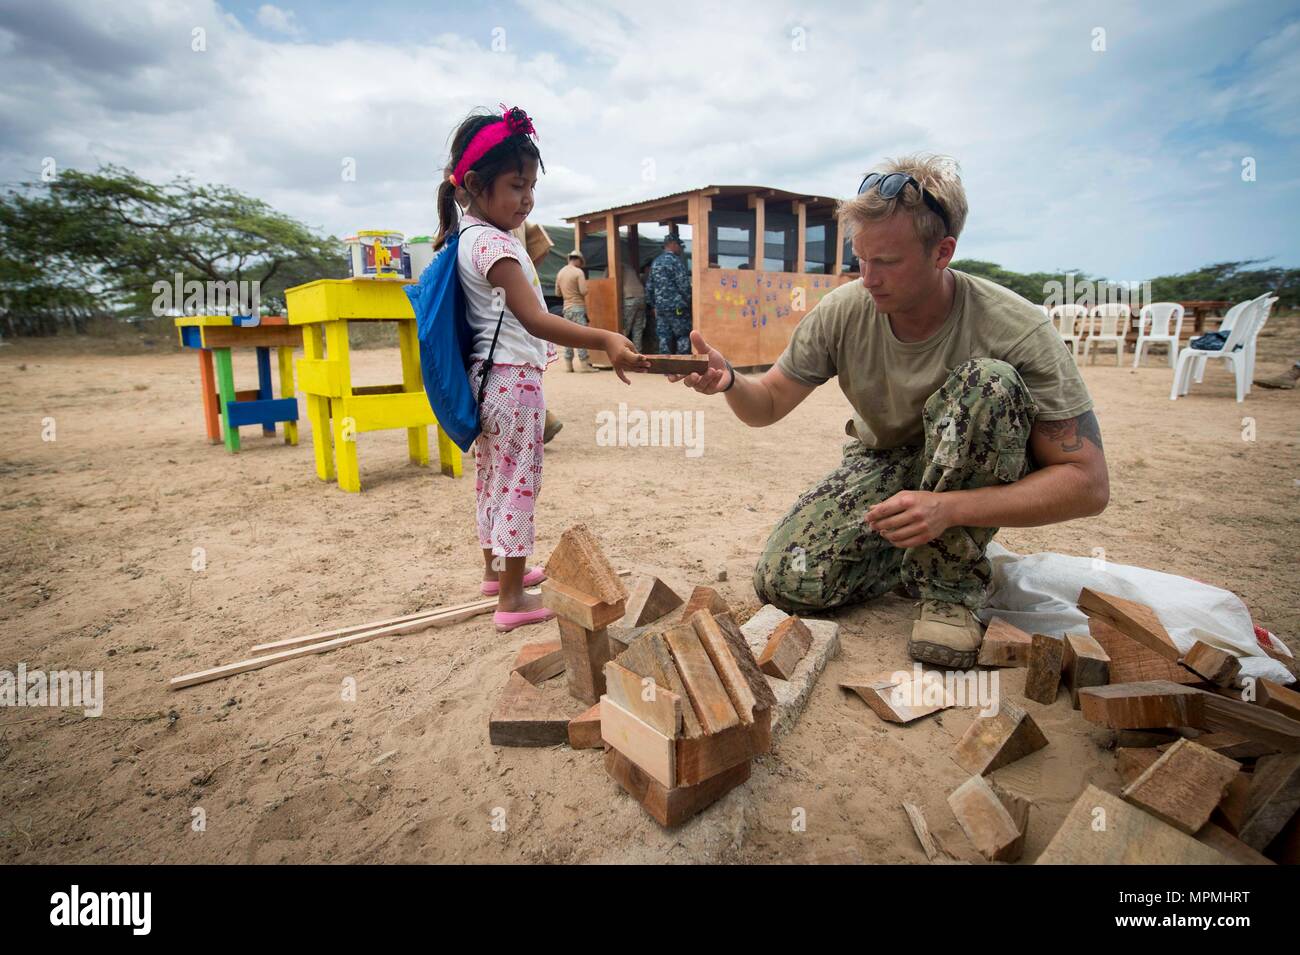 170330-N-YL073-212 MAYAPO, Colombia (March 30, 2017) - Utilitiesman 2nd Class Elliott Shultz, a native of Indianapolis assigned to Construction Battalion Maintenance Unit (CBMU) 202, Norfolk, Va., plays with a child from a Wayuu tribe in Mayapo, Colombia, during Continuing Promise 2017 (CP-17). CP-17 is a U.S. Southern Command-sponsored and U.S. Naval Forces Southern Command/U.S. 4th Fleet-conducted deployment to conduct civil-military operations including humanitarian assistance, training engagements, medical, dental, and veterinary support in an effort to show U.S. support and commitment to  Stock Photo